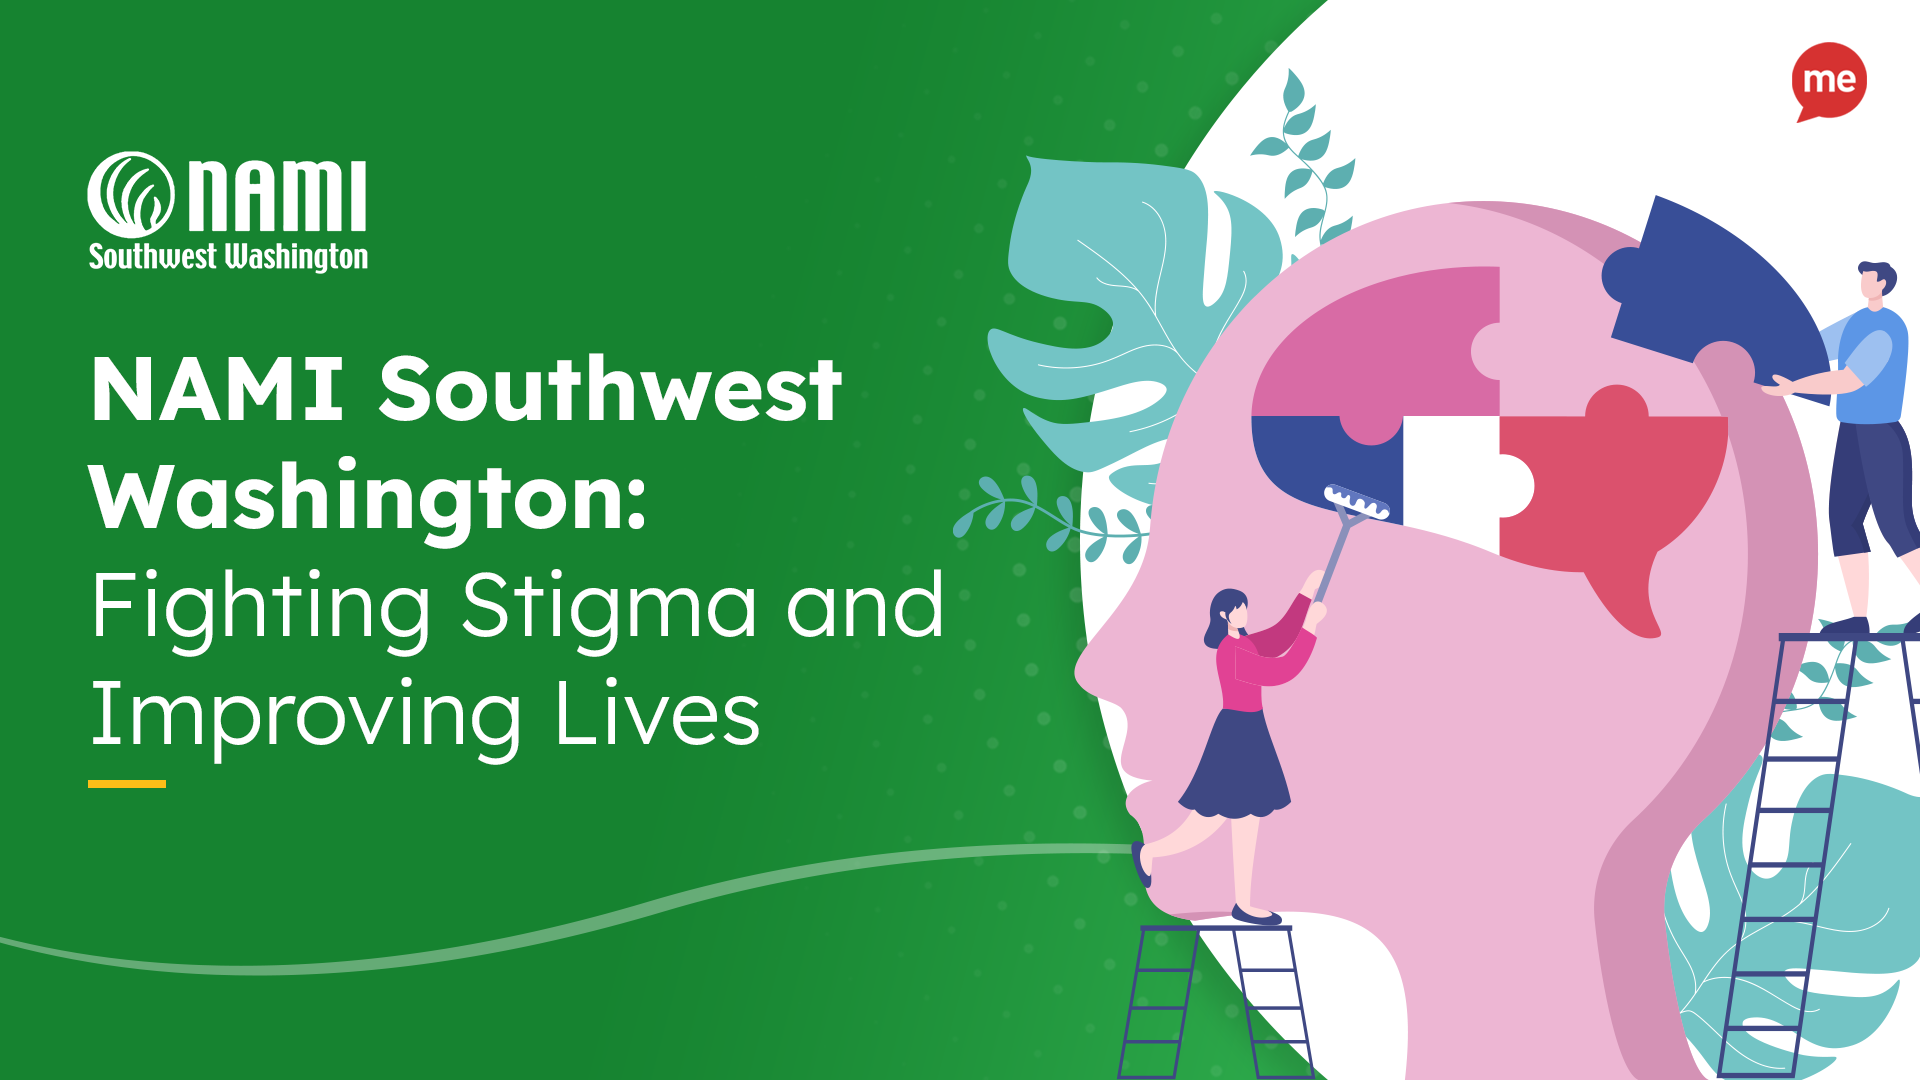 NAMI Southwest Washington: Fighting Stigma and Improving Lives with an illustration of a brain with icons